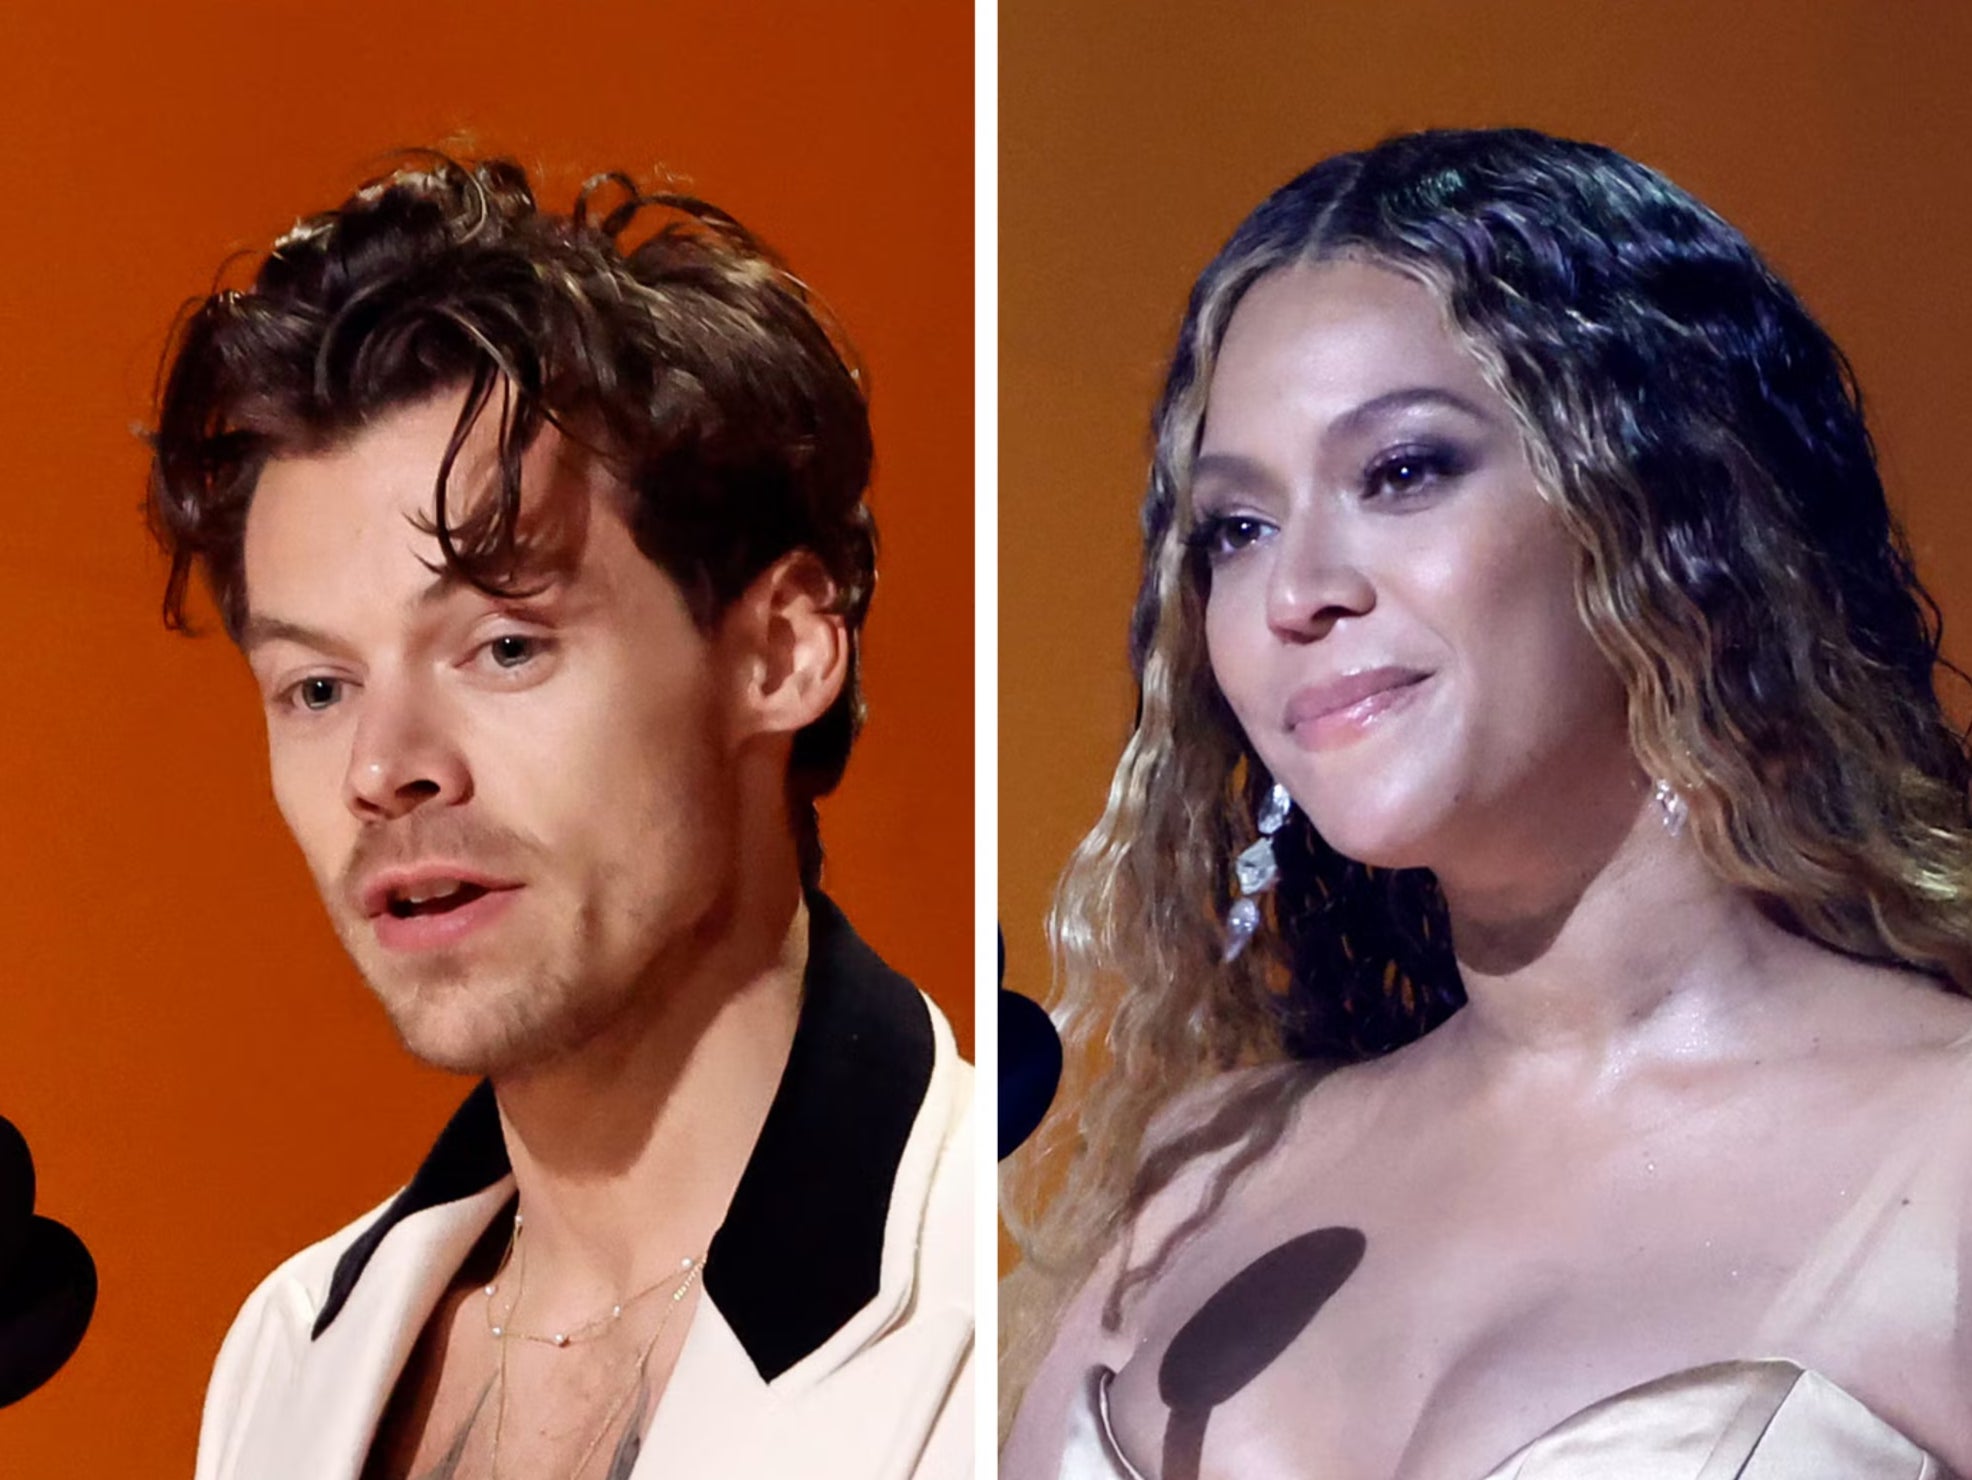 Harry Styles beat Beyoncé to the evening’s top prize despite a record-breaking evening for the latter